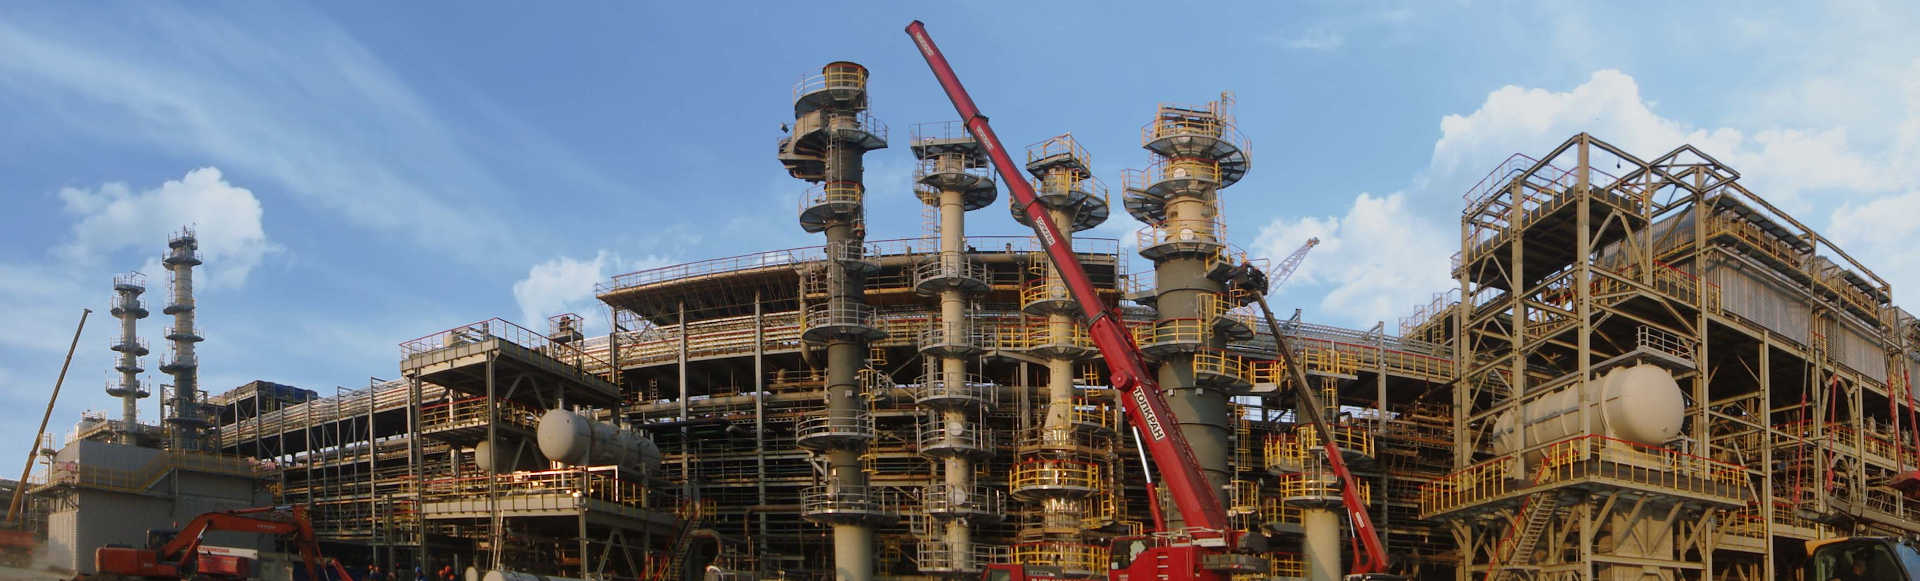 Schwartz Hautmont can provide to a reffinery plant the equipment, columns, platforms, ladders and the steel structure.